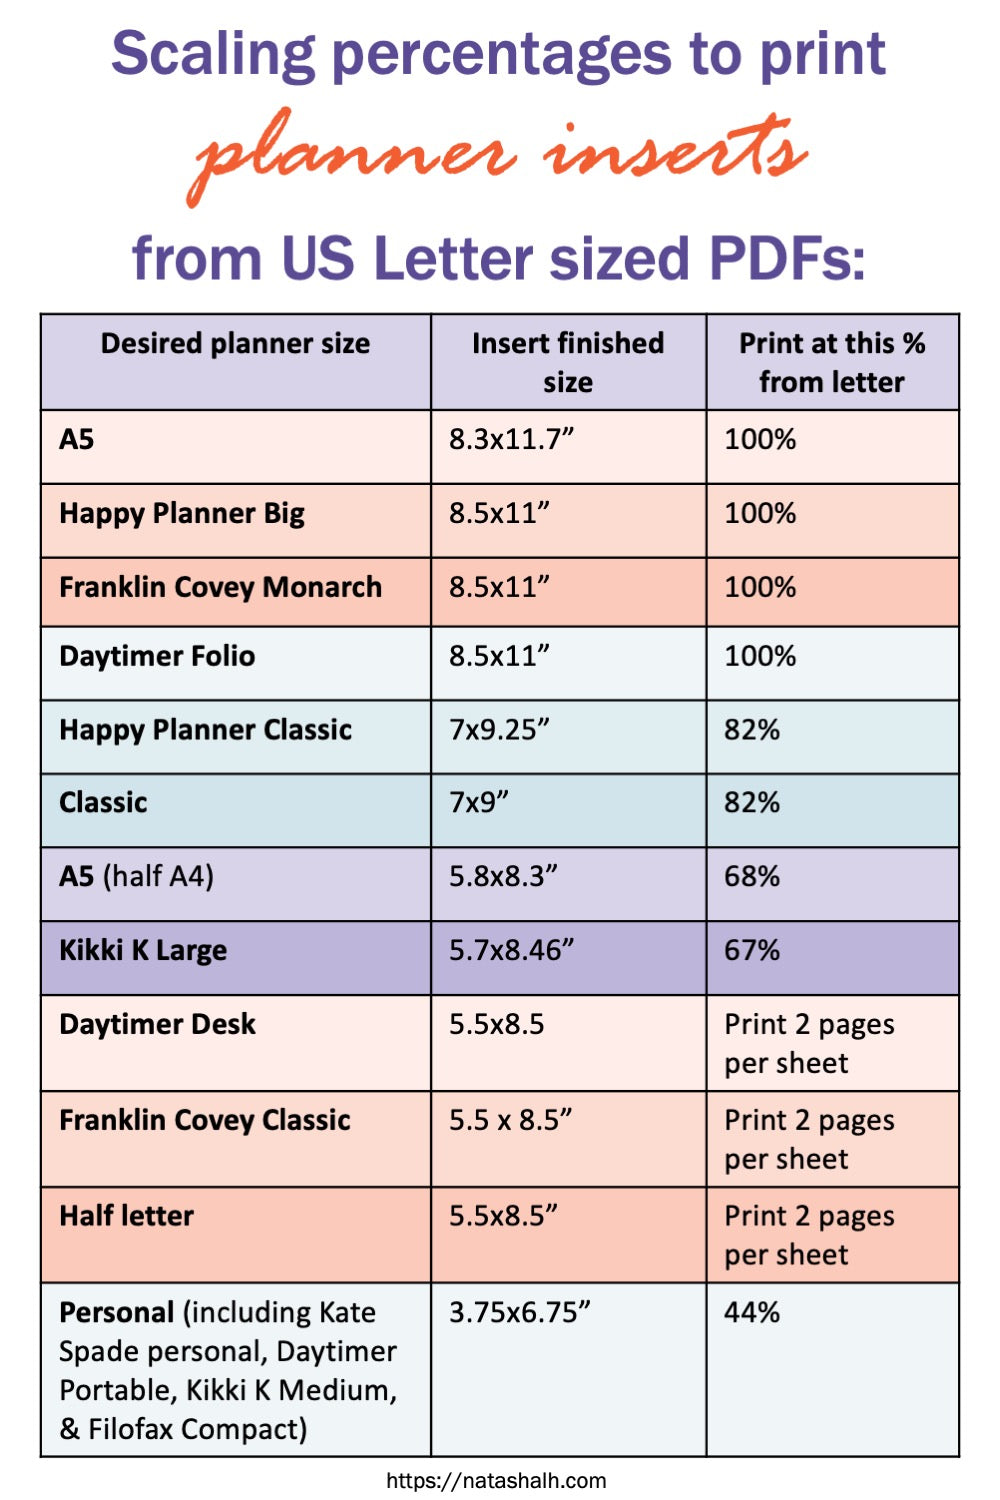 A chart of scaling percentages  to print planner inserts from us letter sized PDFs